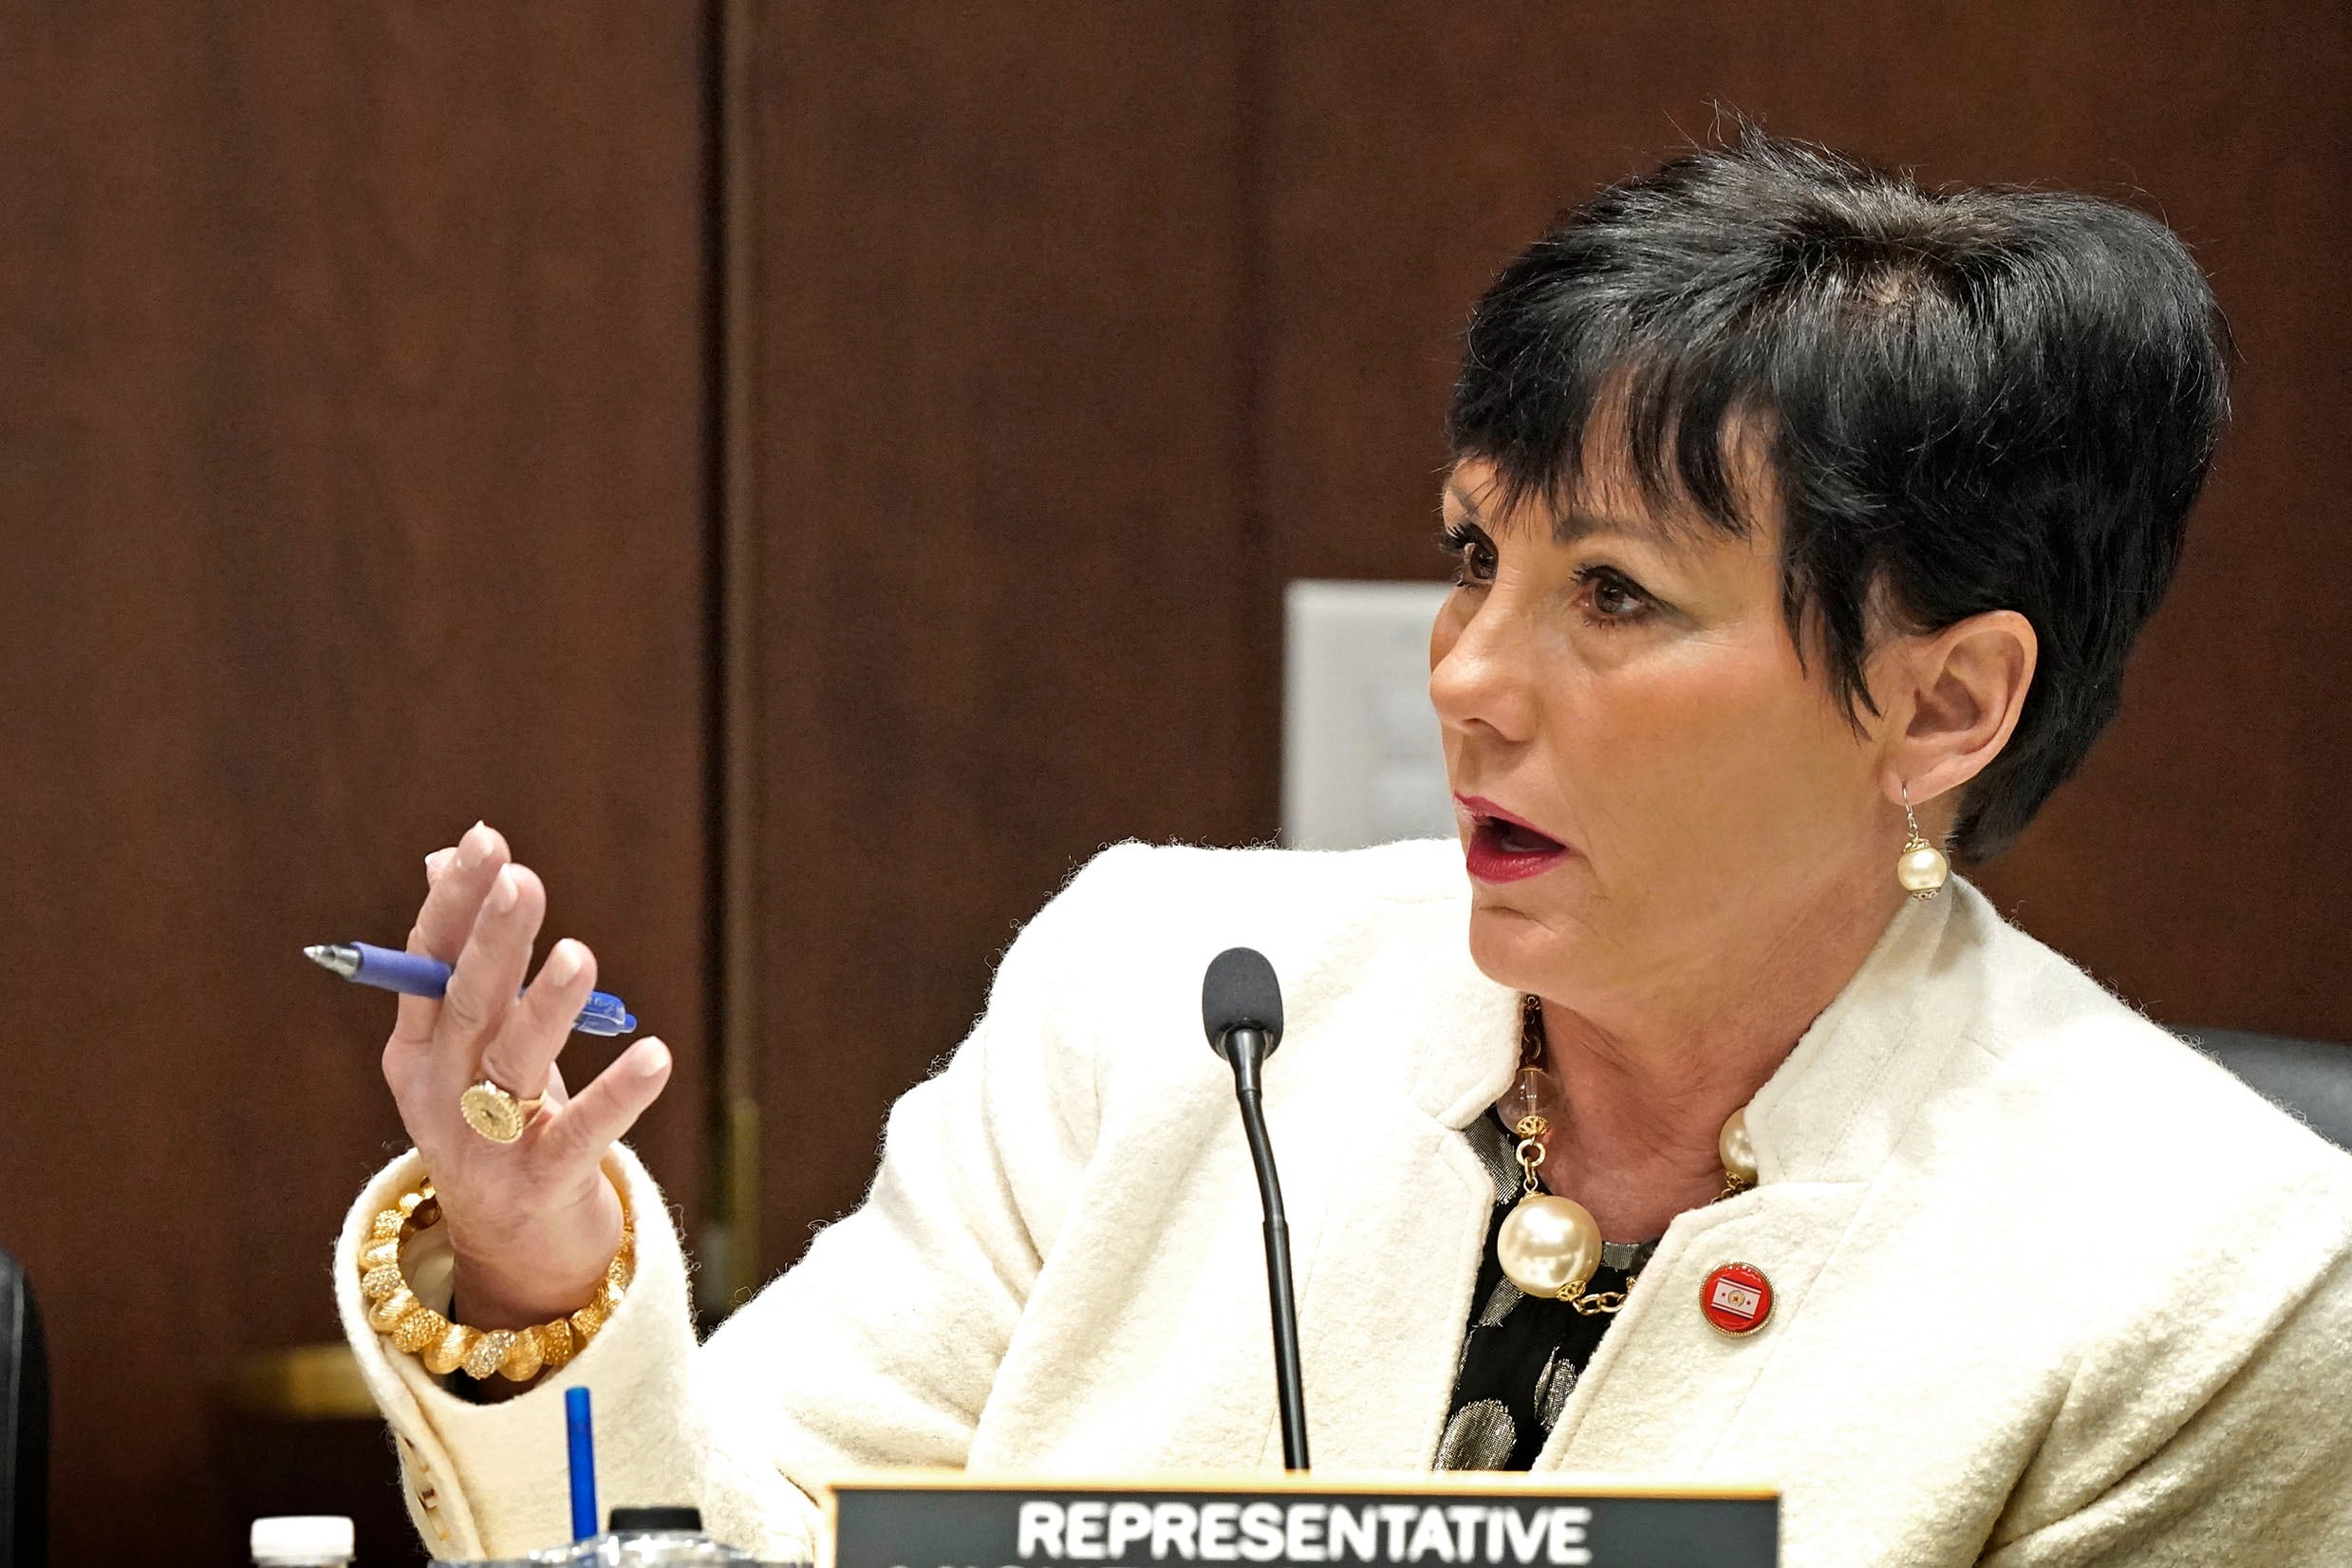 A woman in a white business suit gestures as she speaks into a microphone in a legislative chamber.